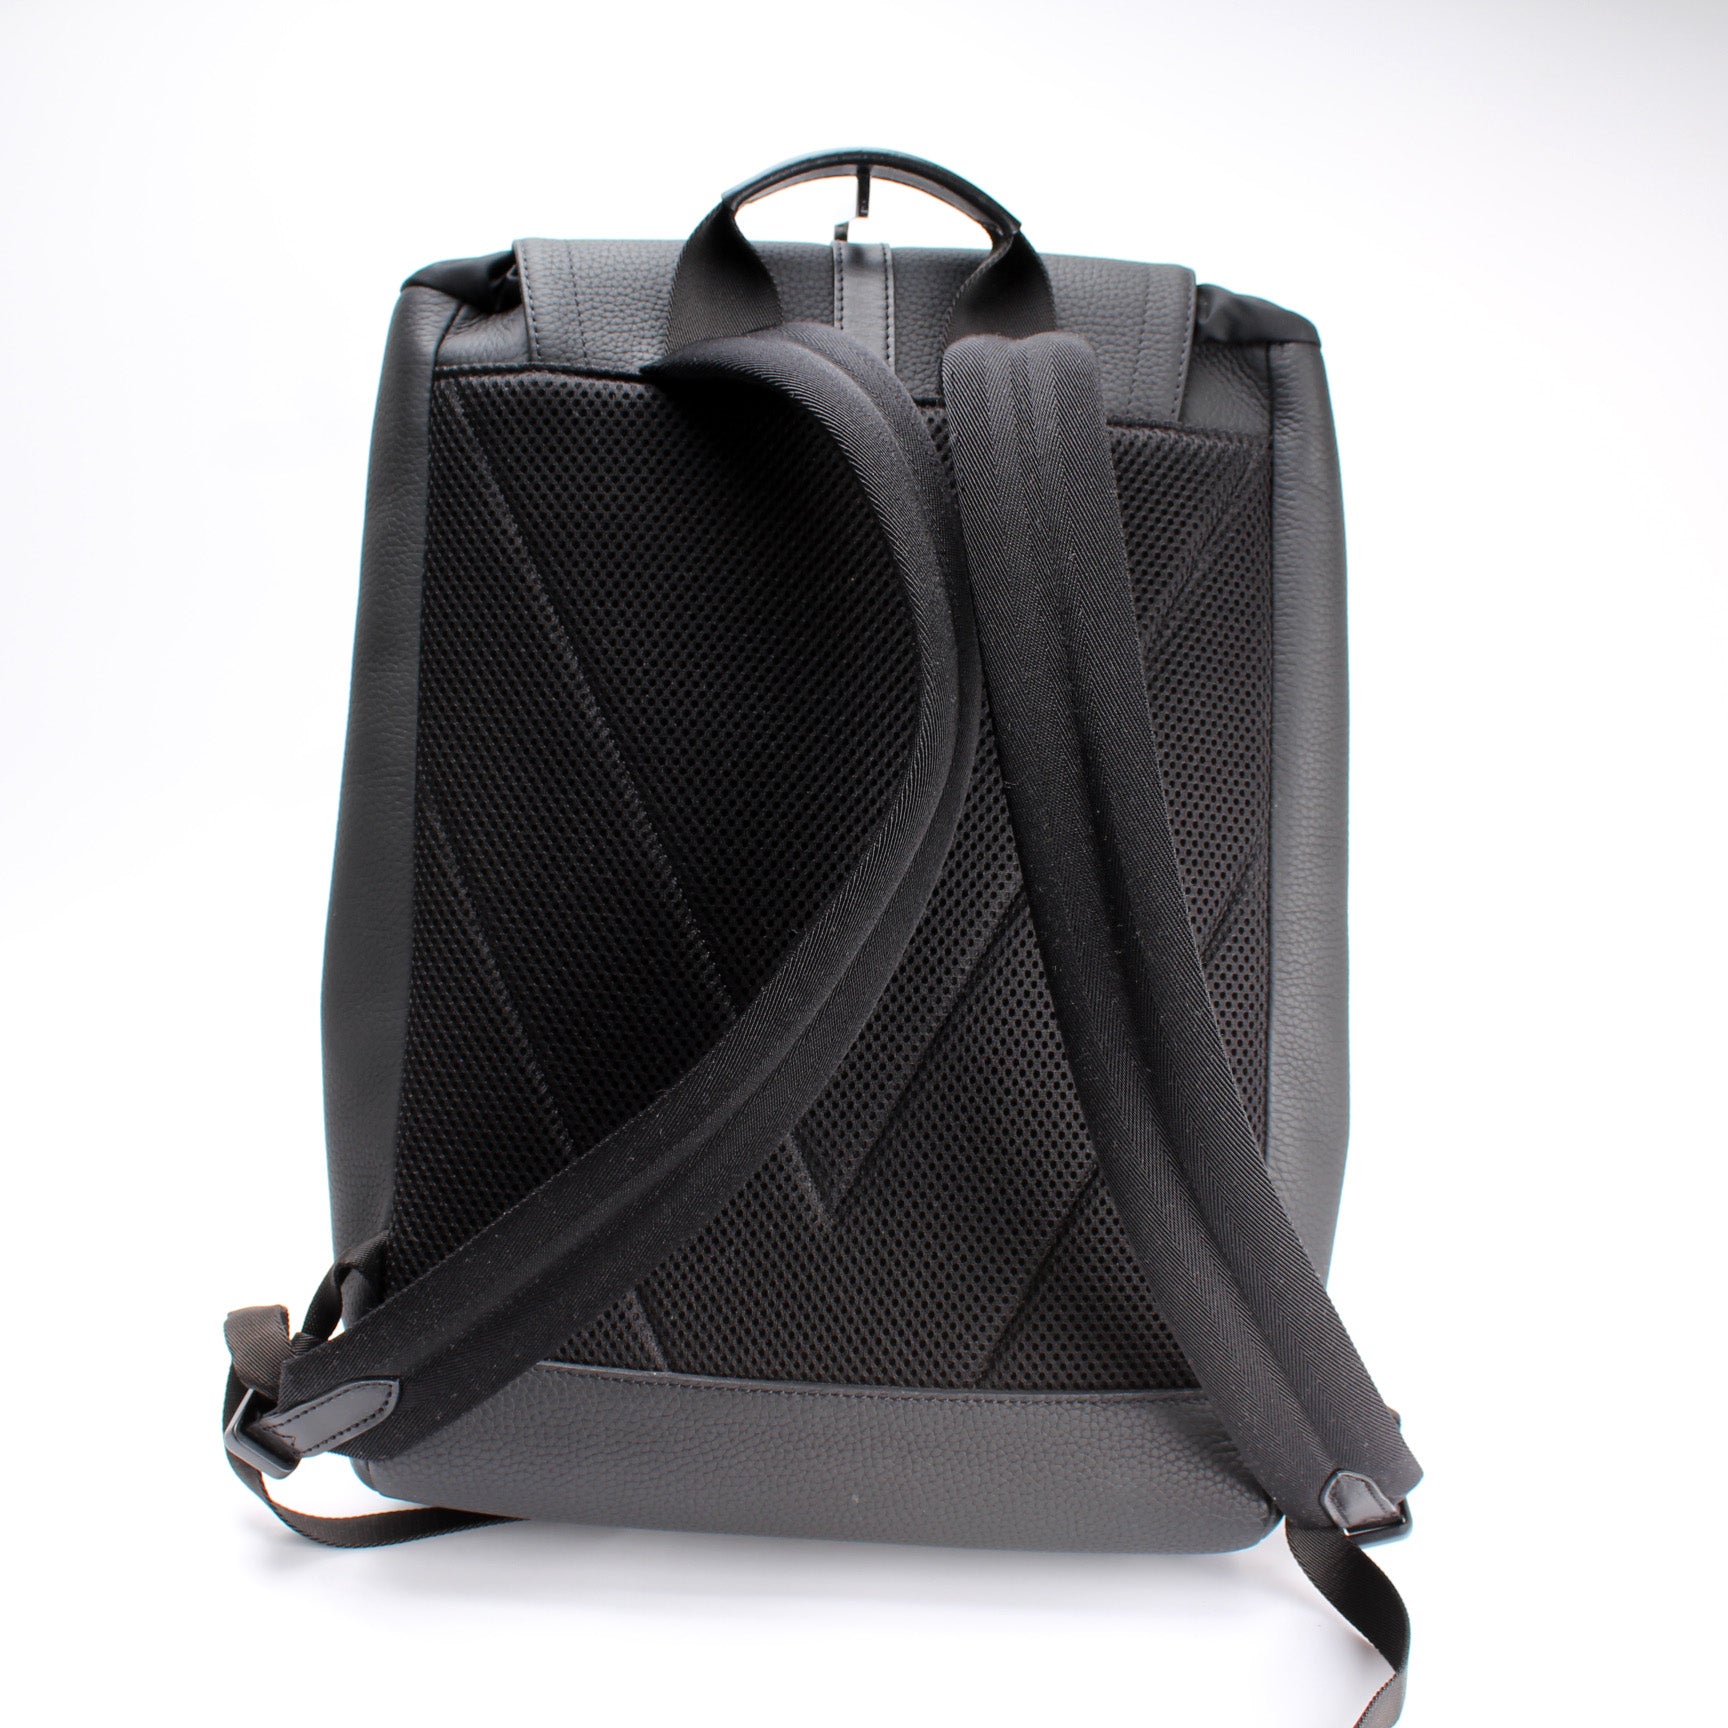 christopher backpack taurillon leather